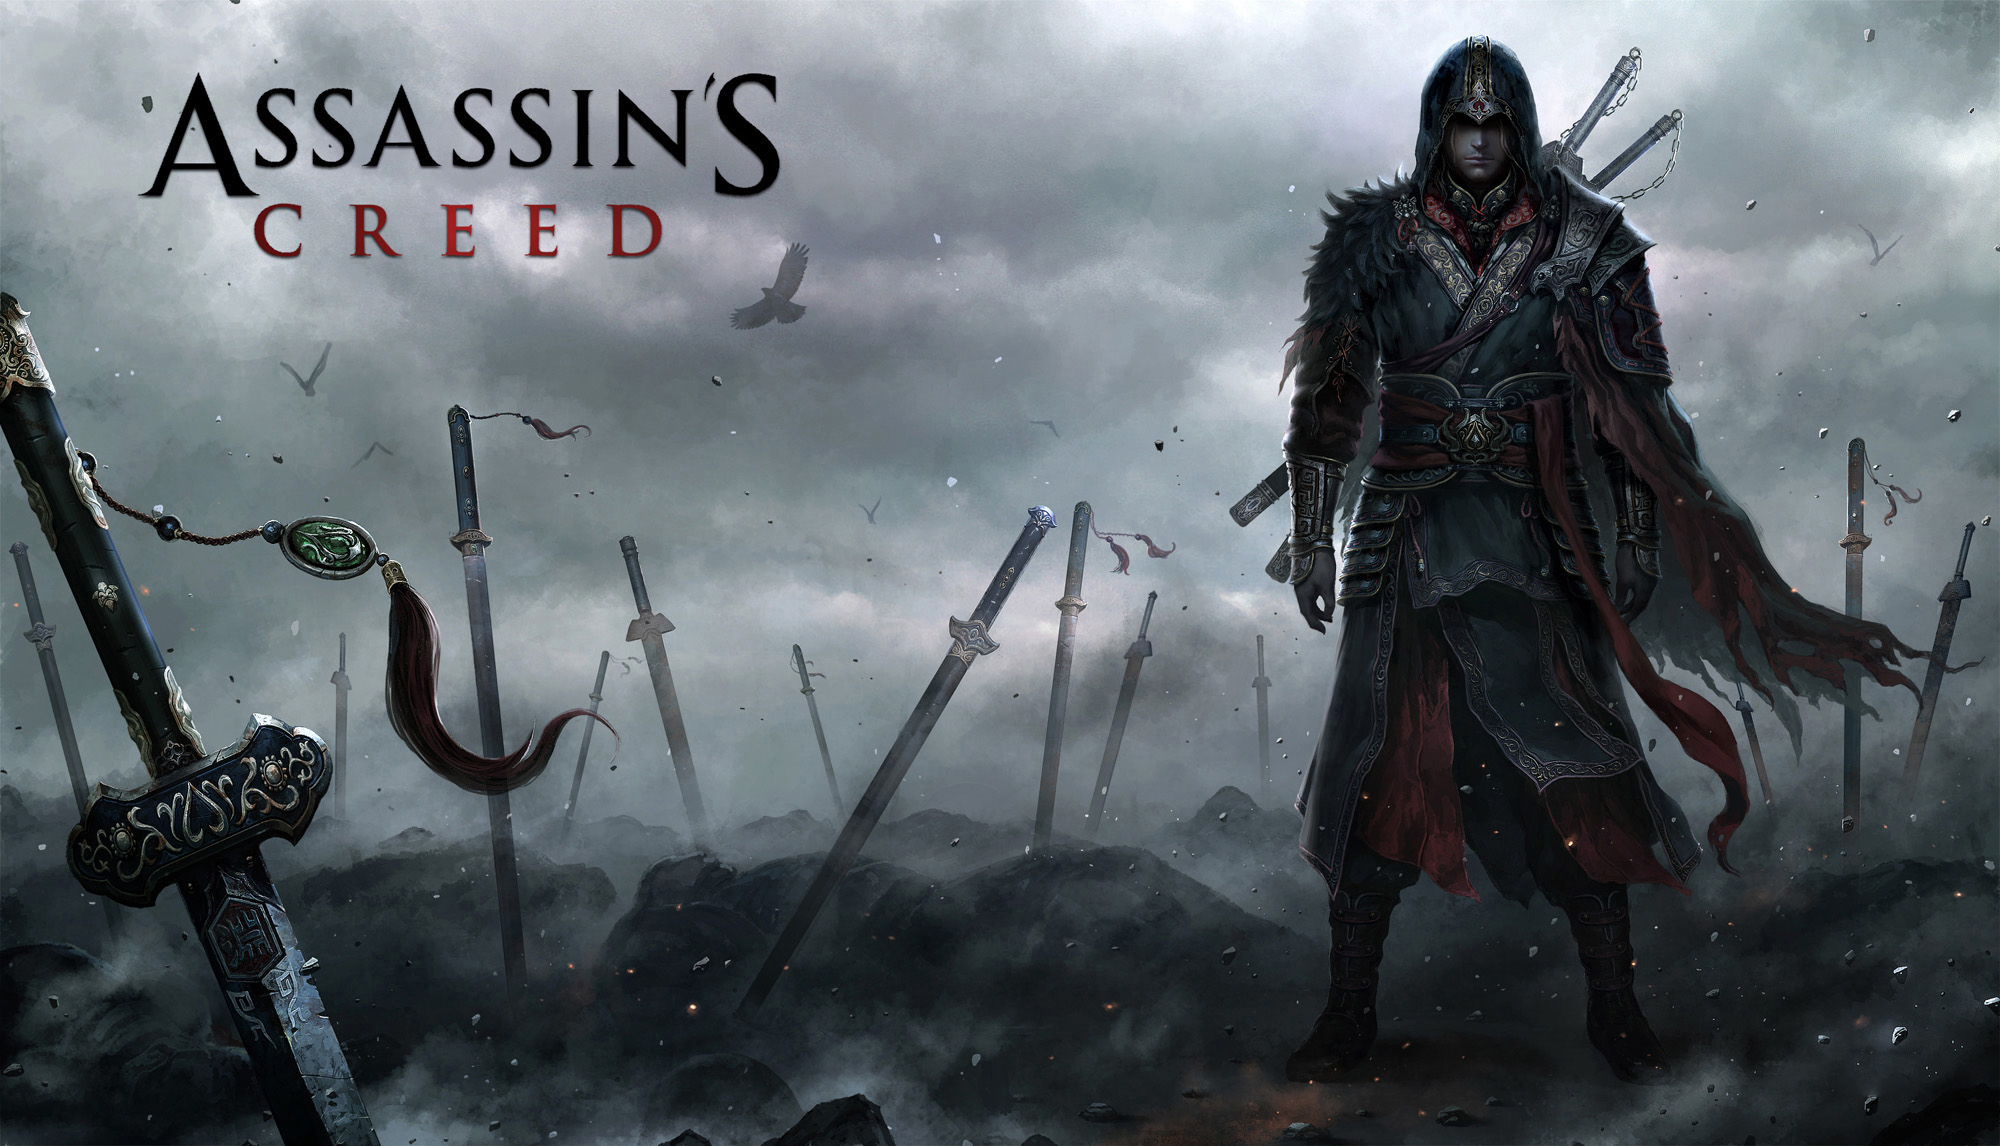 Assassin’s Creed 4 Game HD Wallpapers Pictures Images Collections